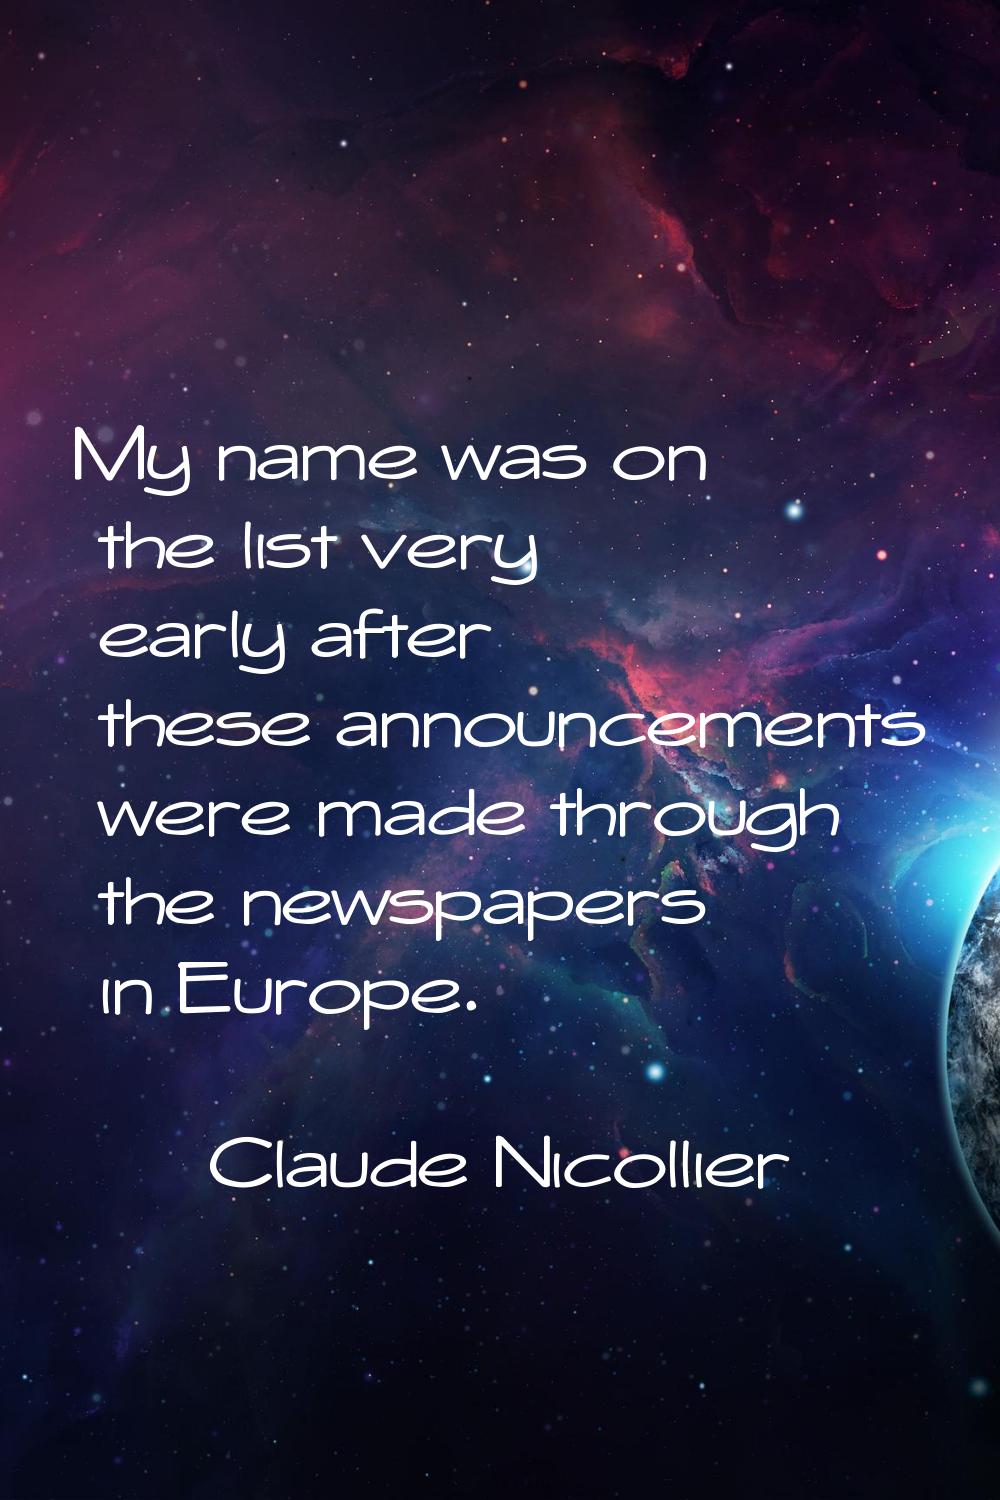 My name was on the list very early after these announcements were made through the newspapers in Eu